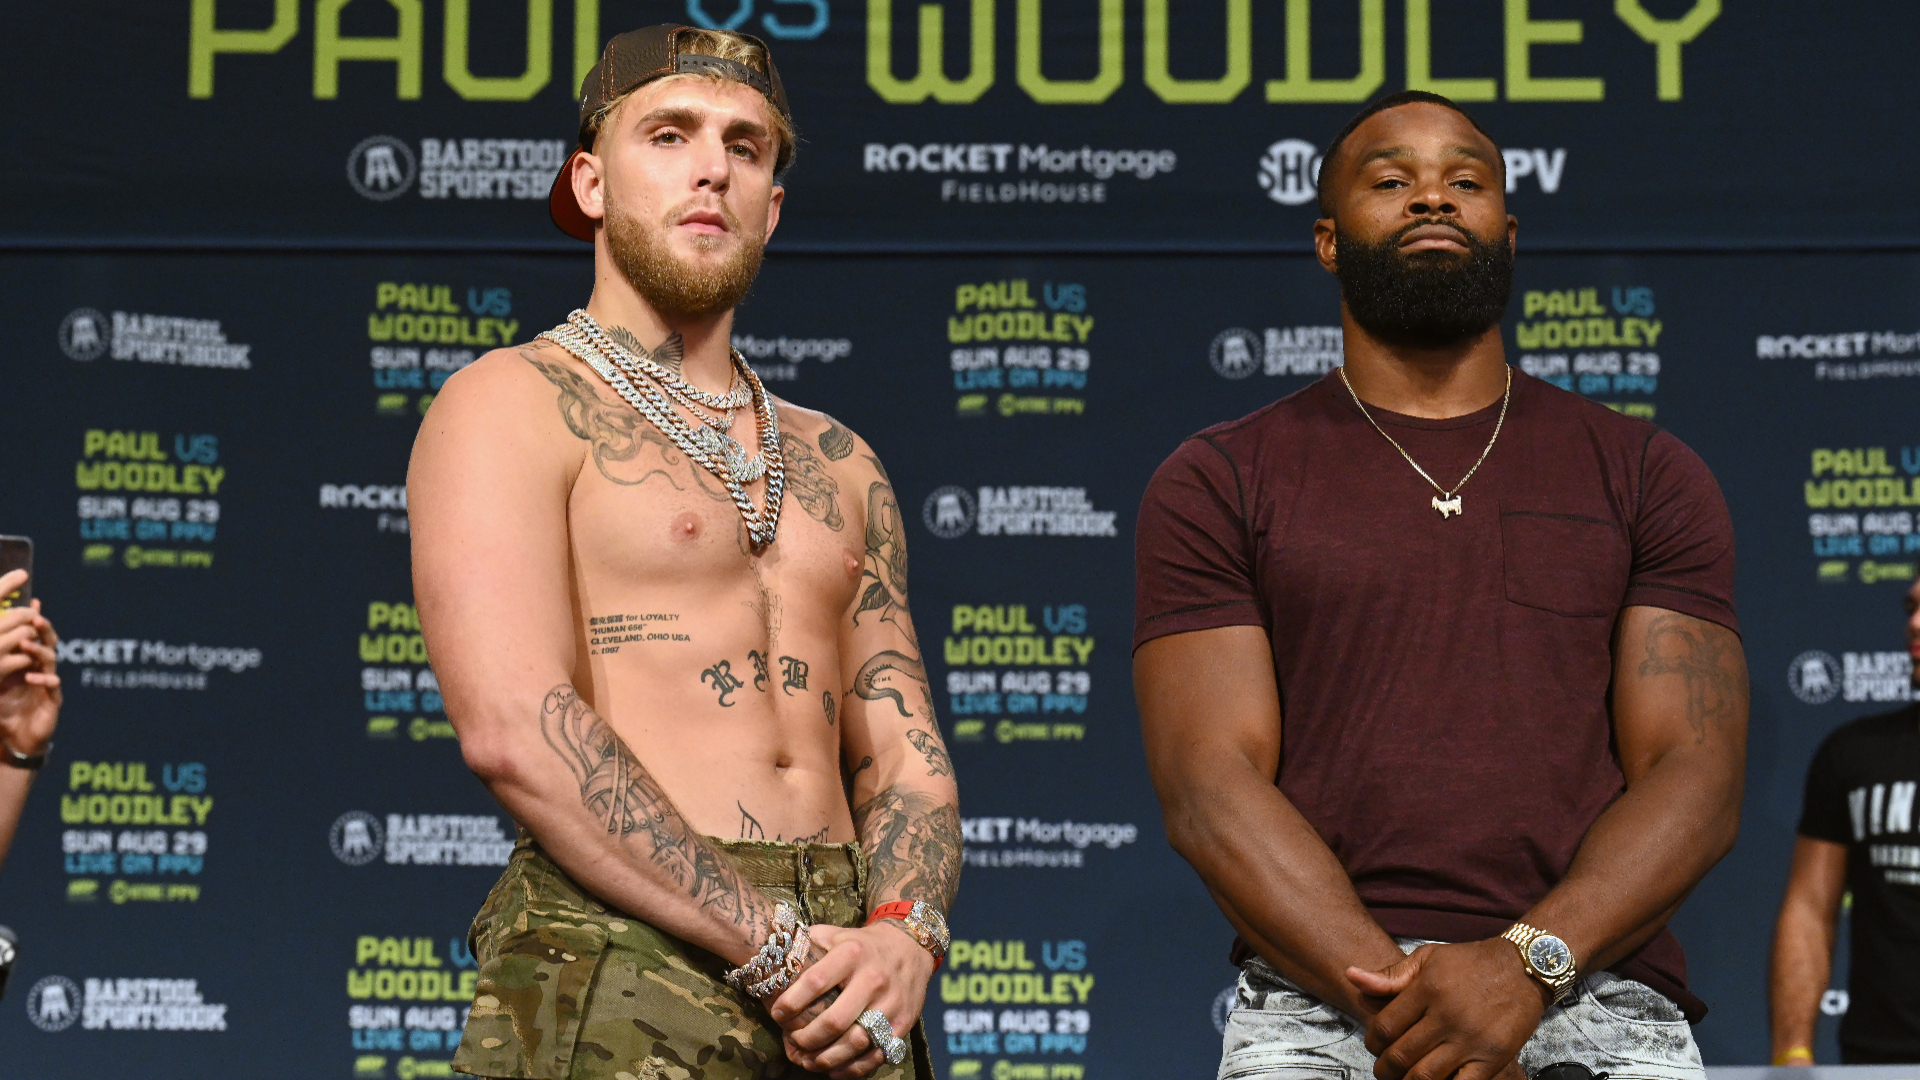 People React to Jake Paul’s Split Decision Win Over Tyron Woodley